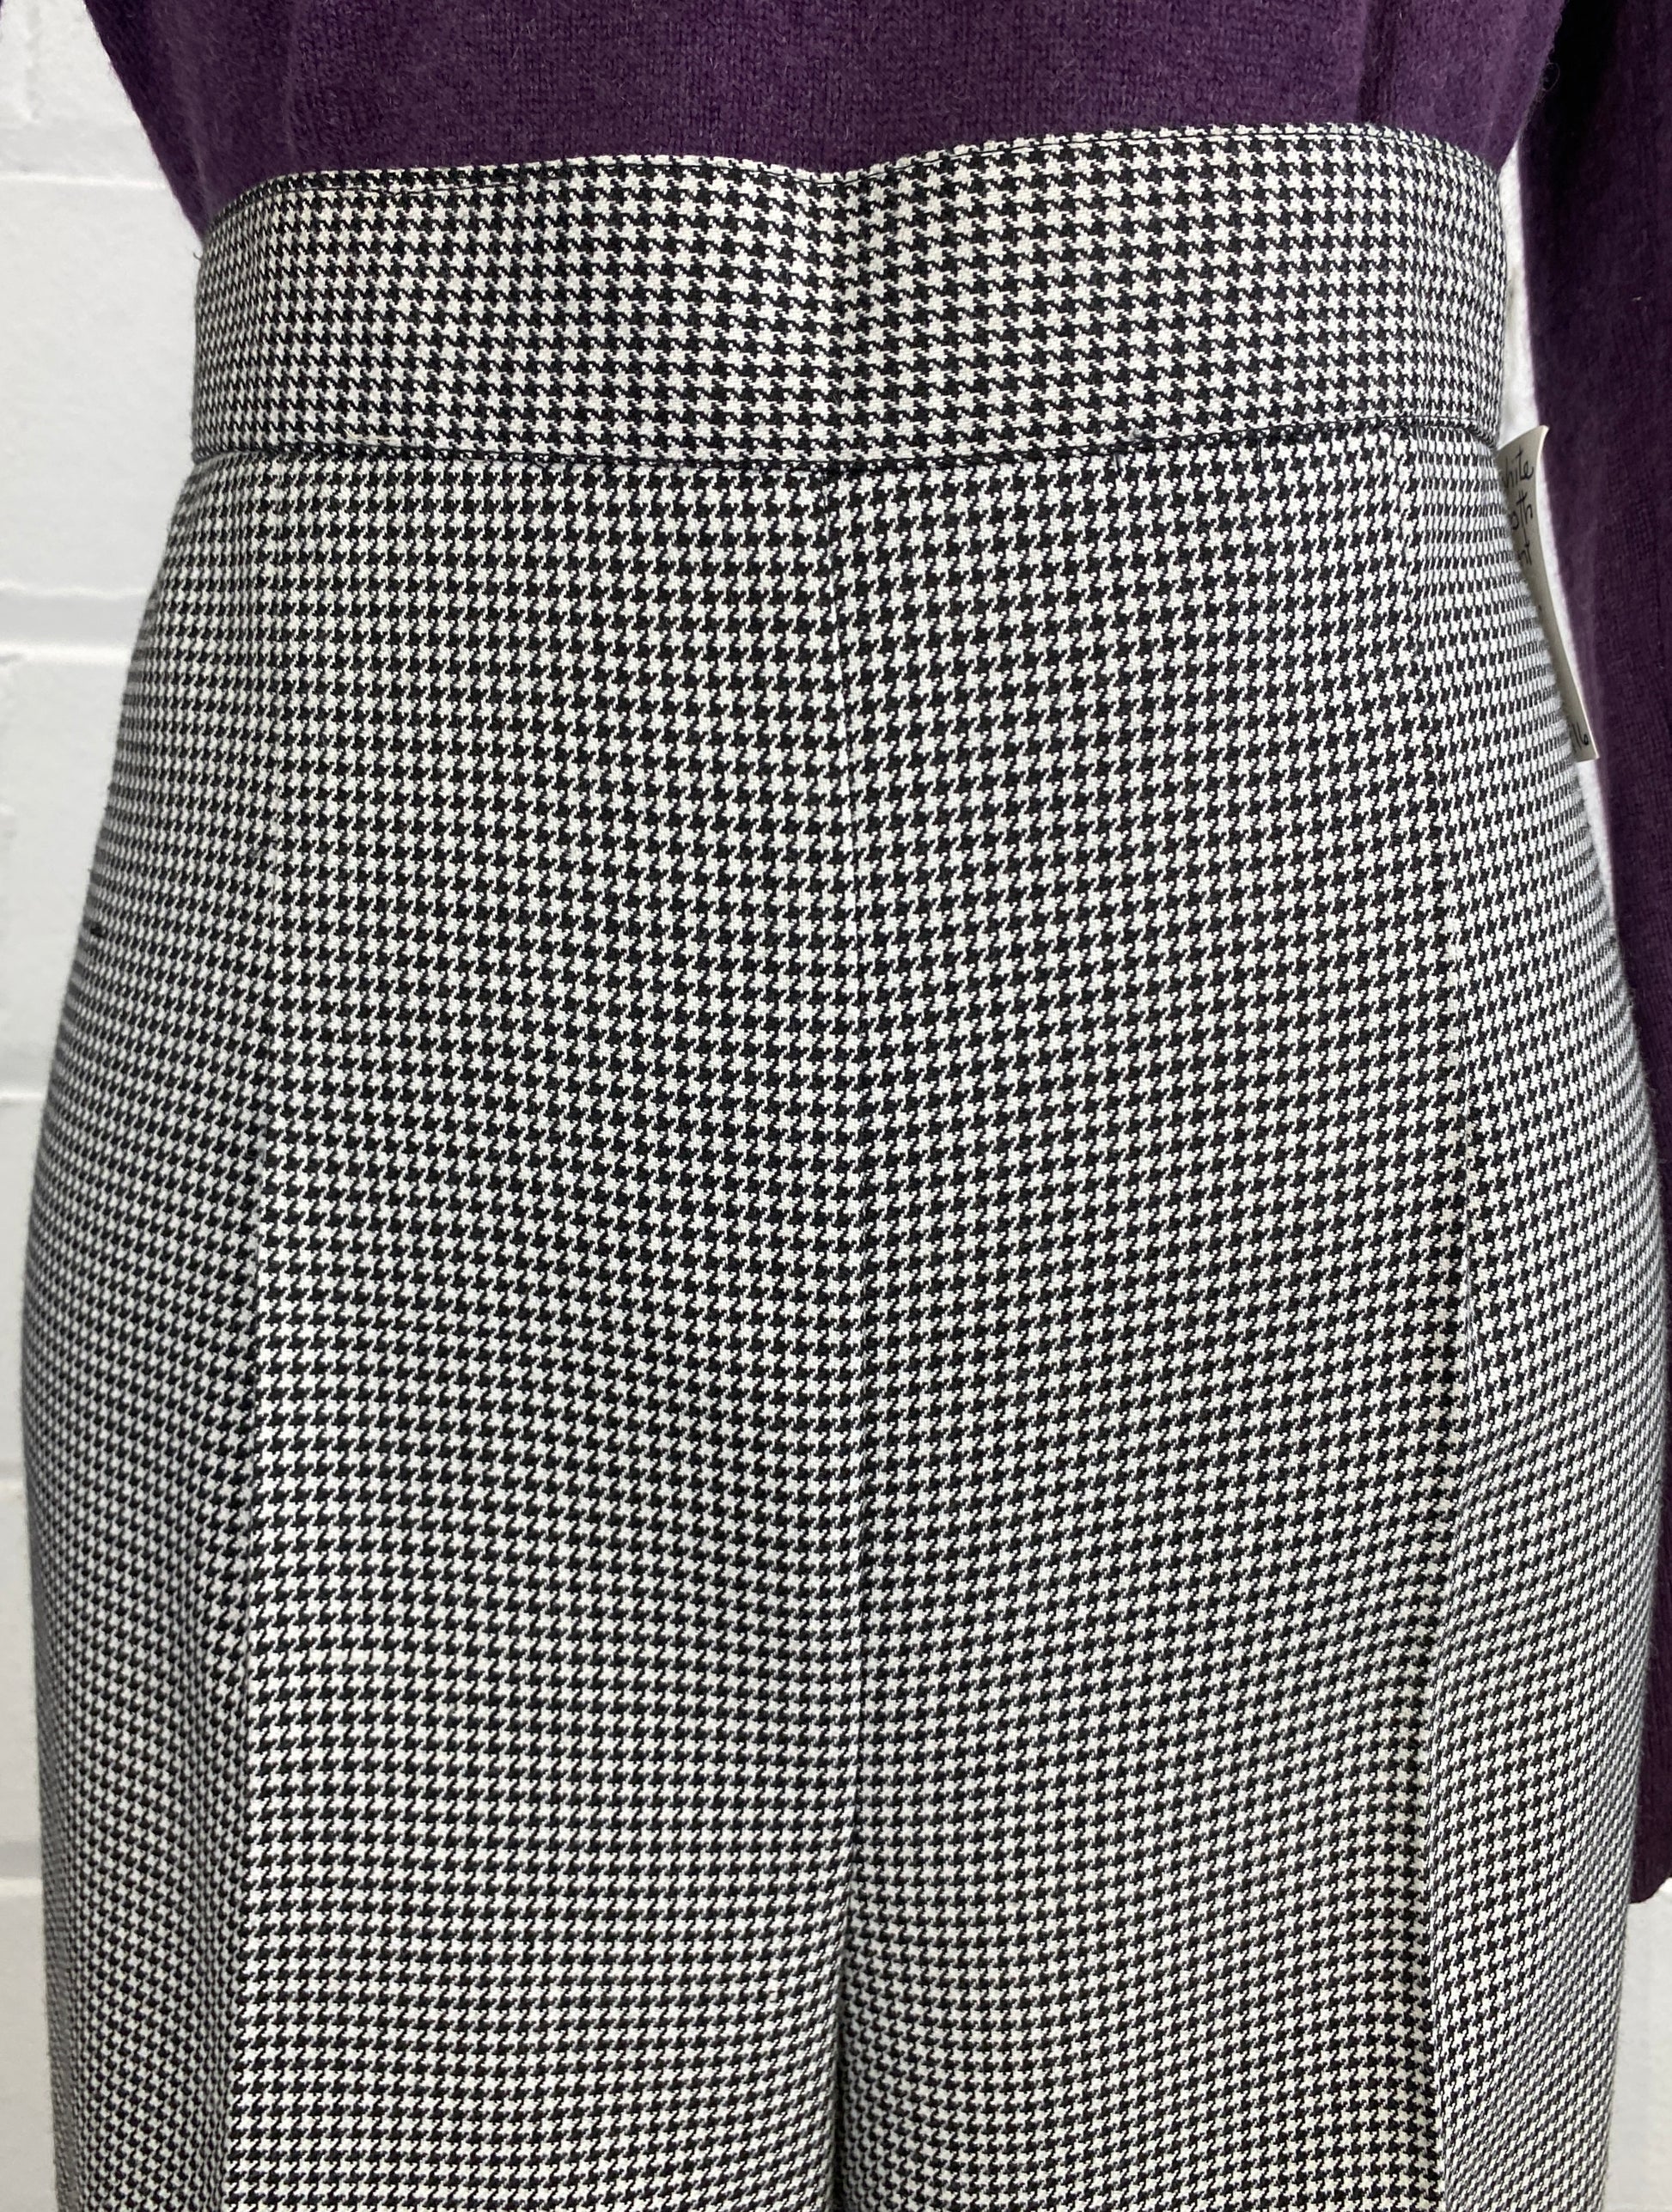 Vintage 1980s Black & White Houndstooth Check Trousers, W36"